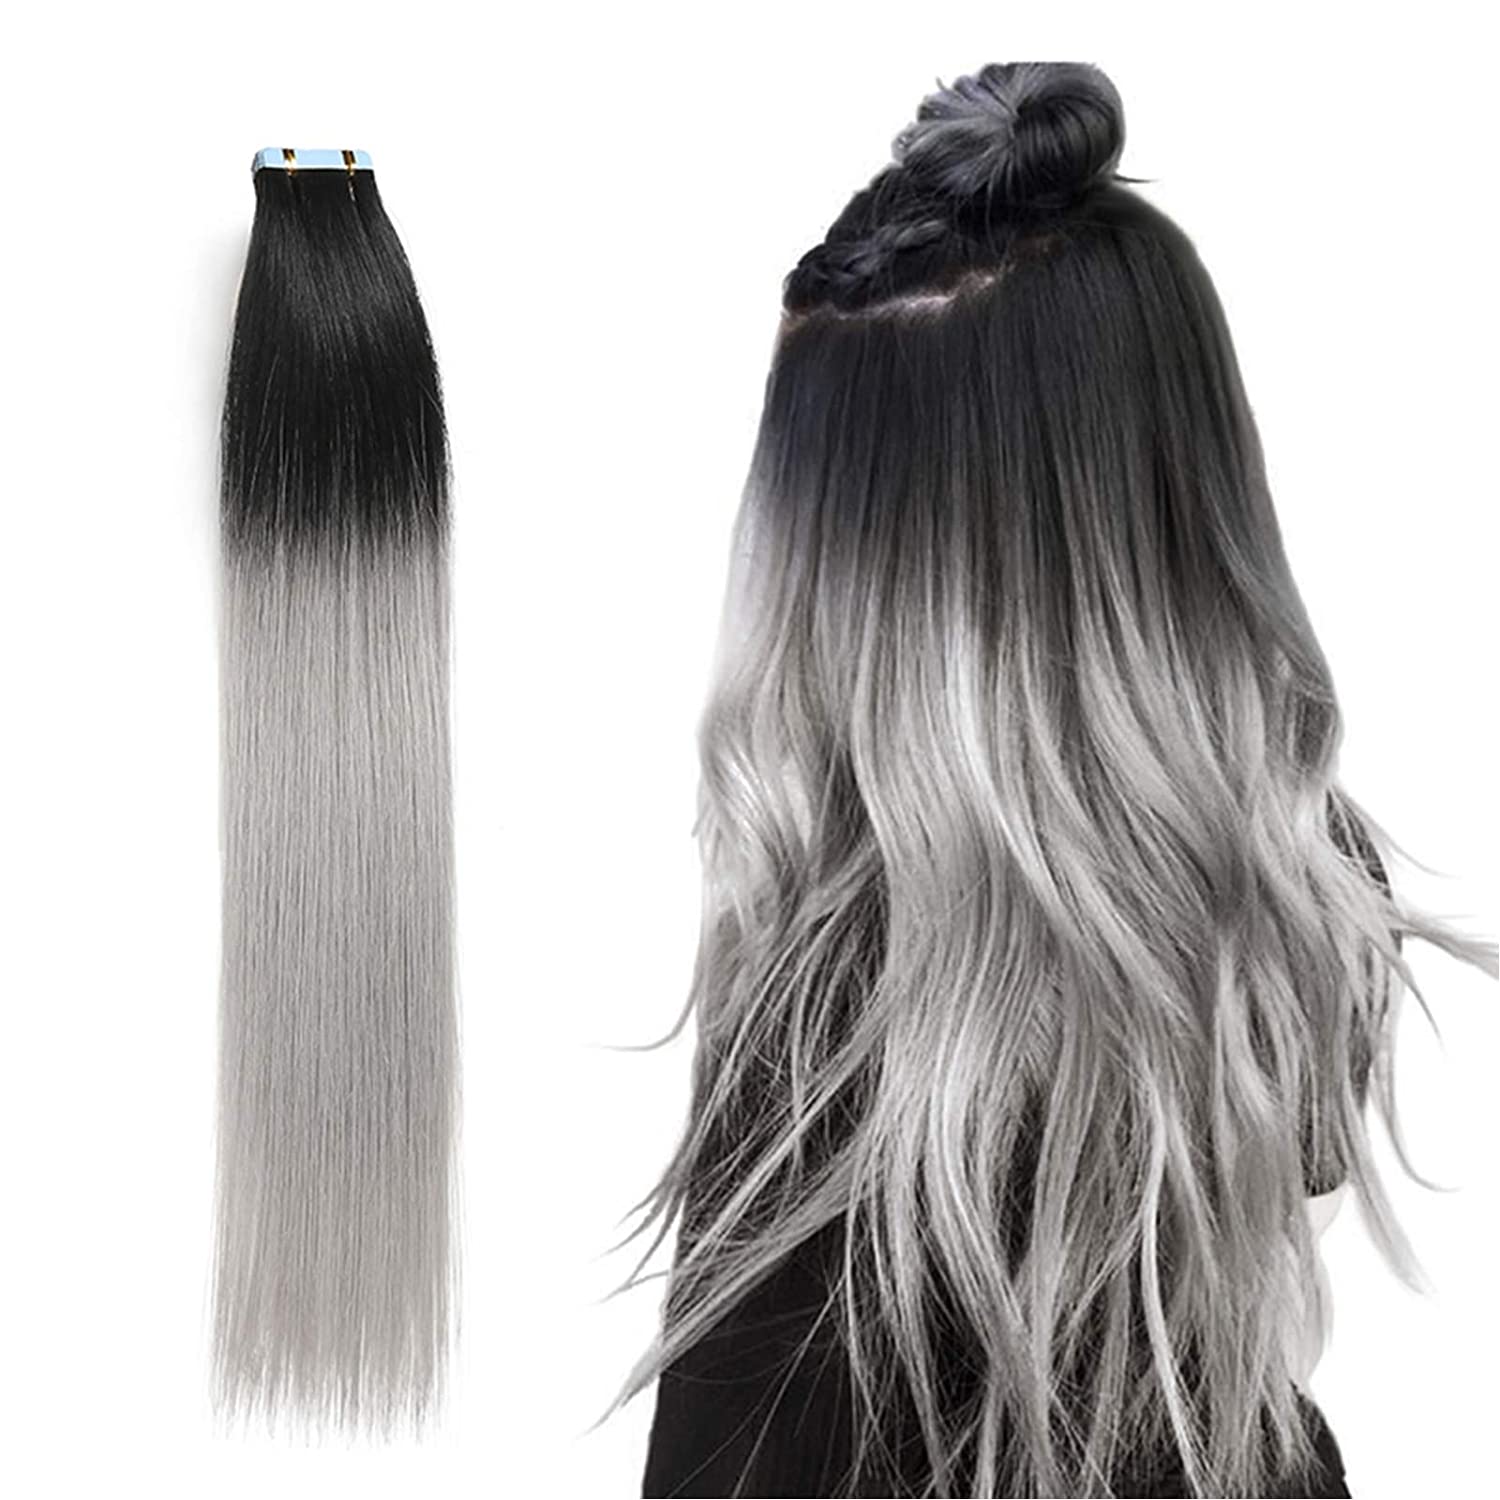 v-shape-hair-extensions-a-product-for-beautiful-hair-lovers-in-wholesale-hair-vendor-2